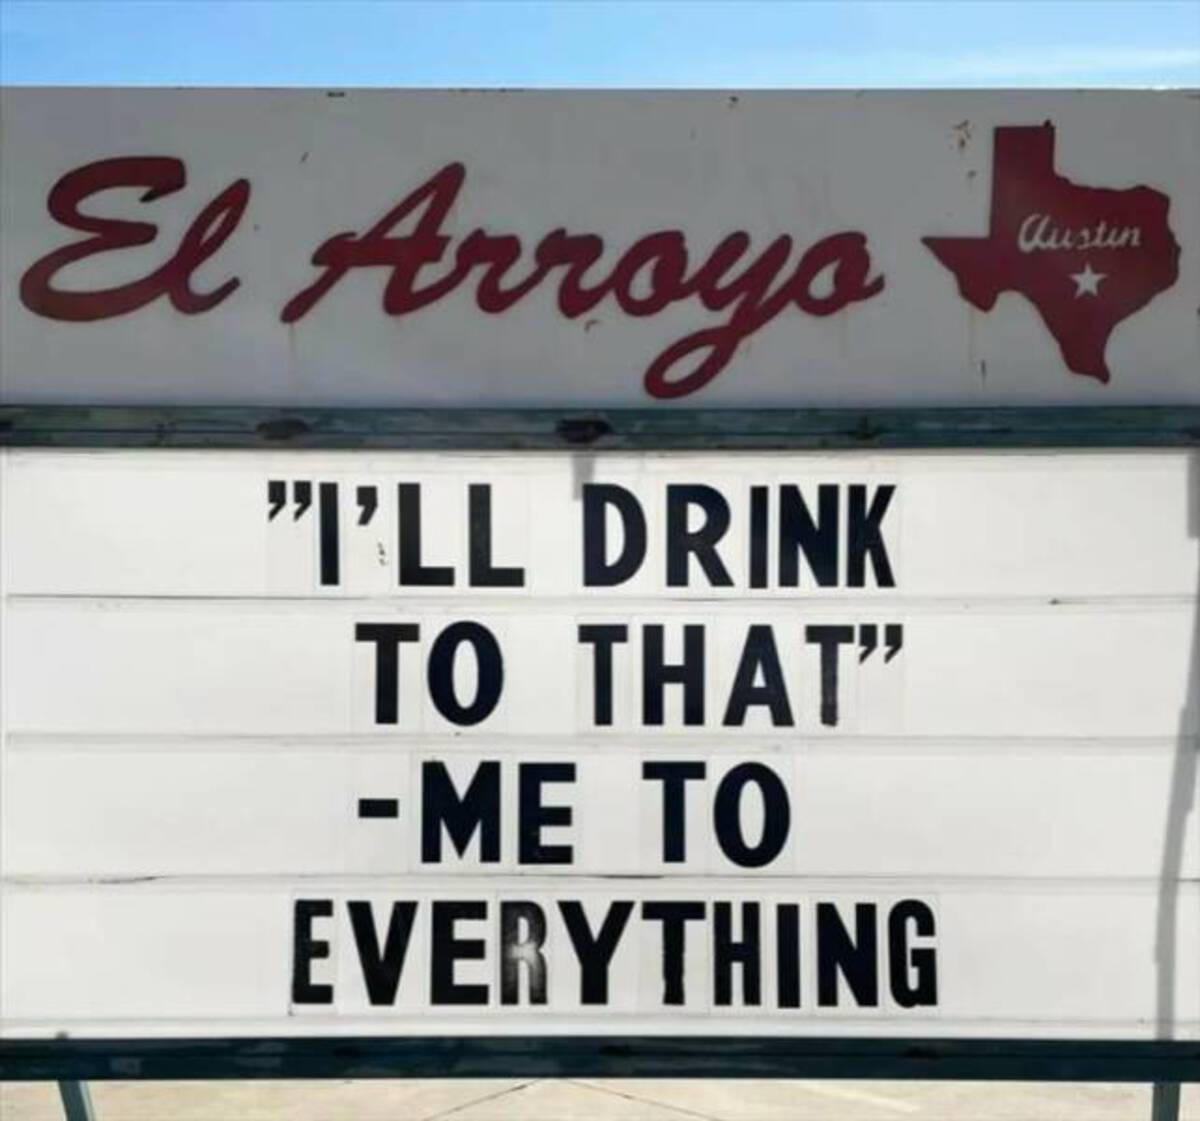 signage - El Arroyo "I'Ll Drink To That" Me To Everything austin